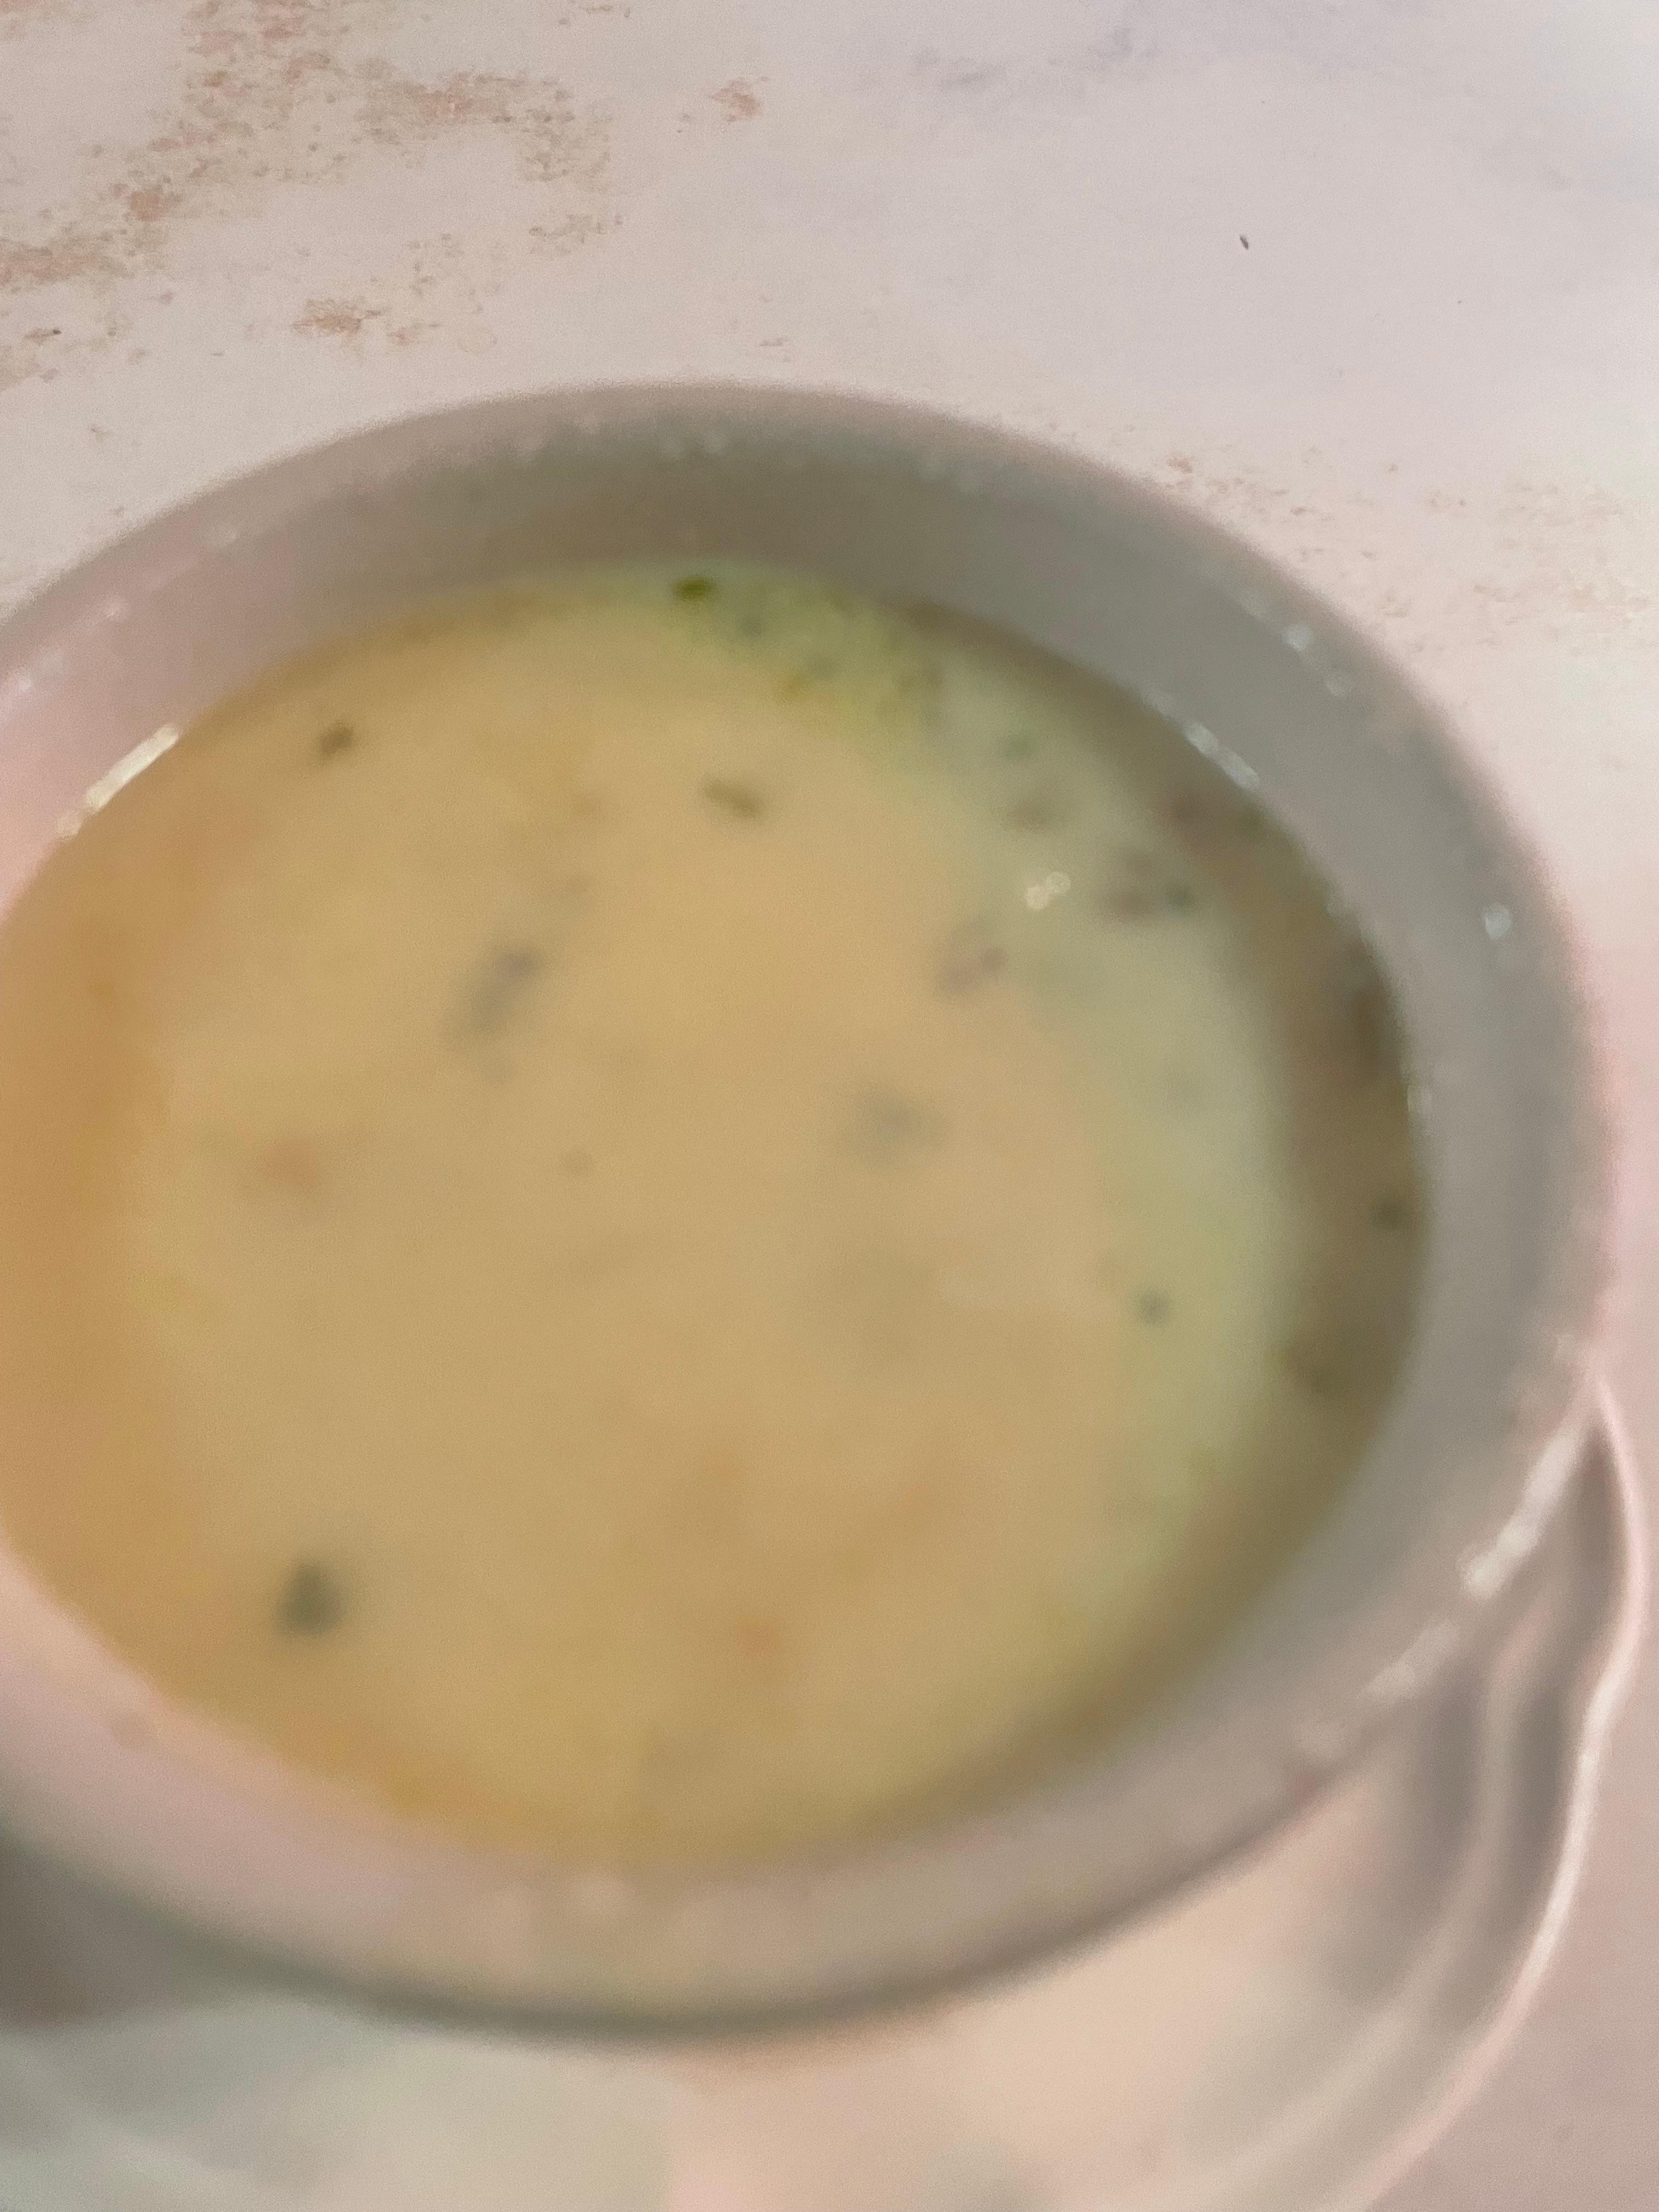 cup of New England clam chowder